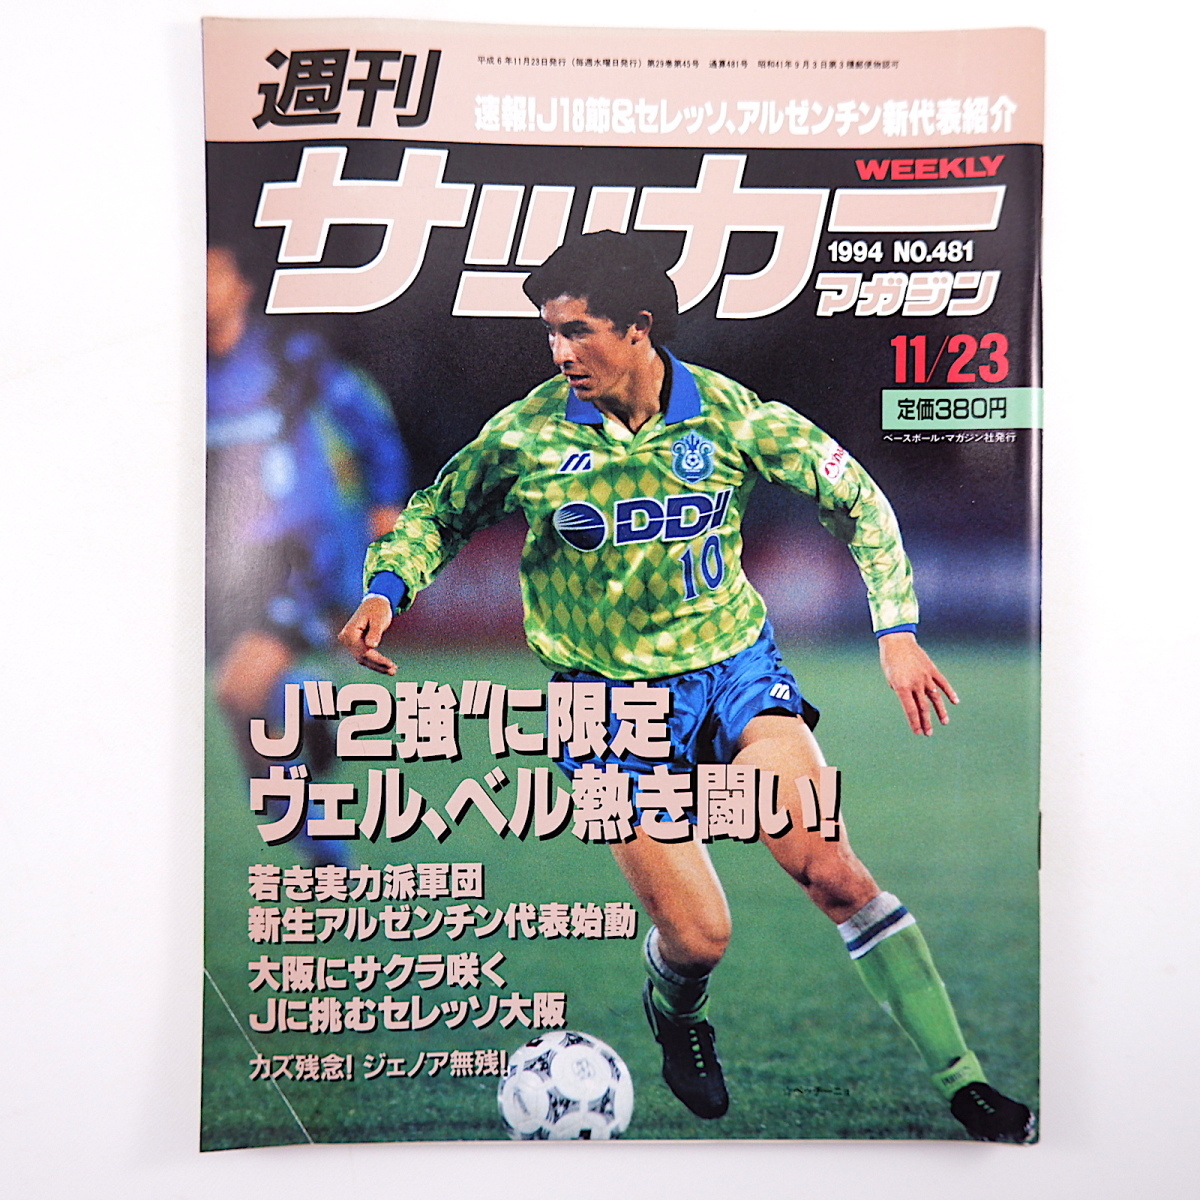  weekly soccer magazine 1994 year 11 month 23 day number *ve Rudy / bell mare 2 a little over selection so Osaka je Noah /kaz middle west ..U16 Japan representative Tony nyo/ Shimizu 